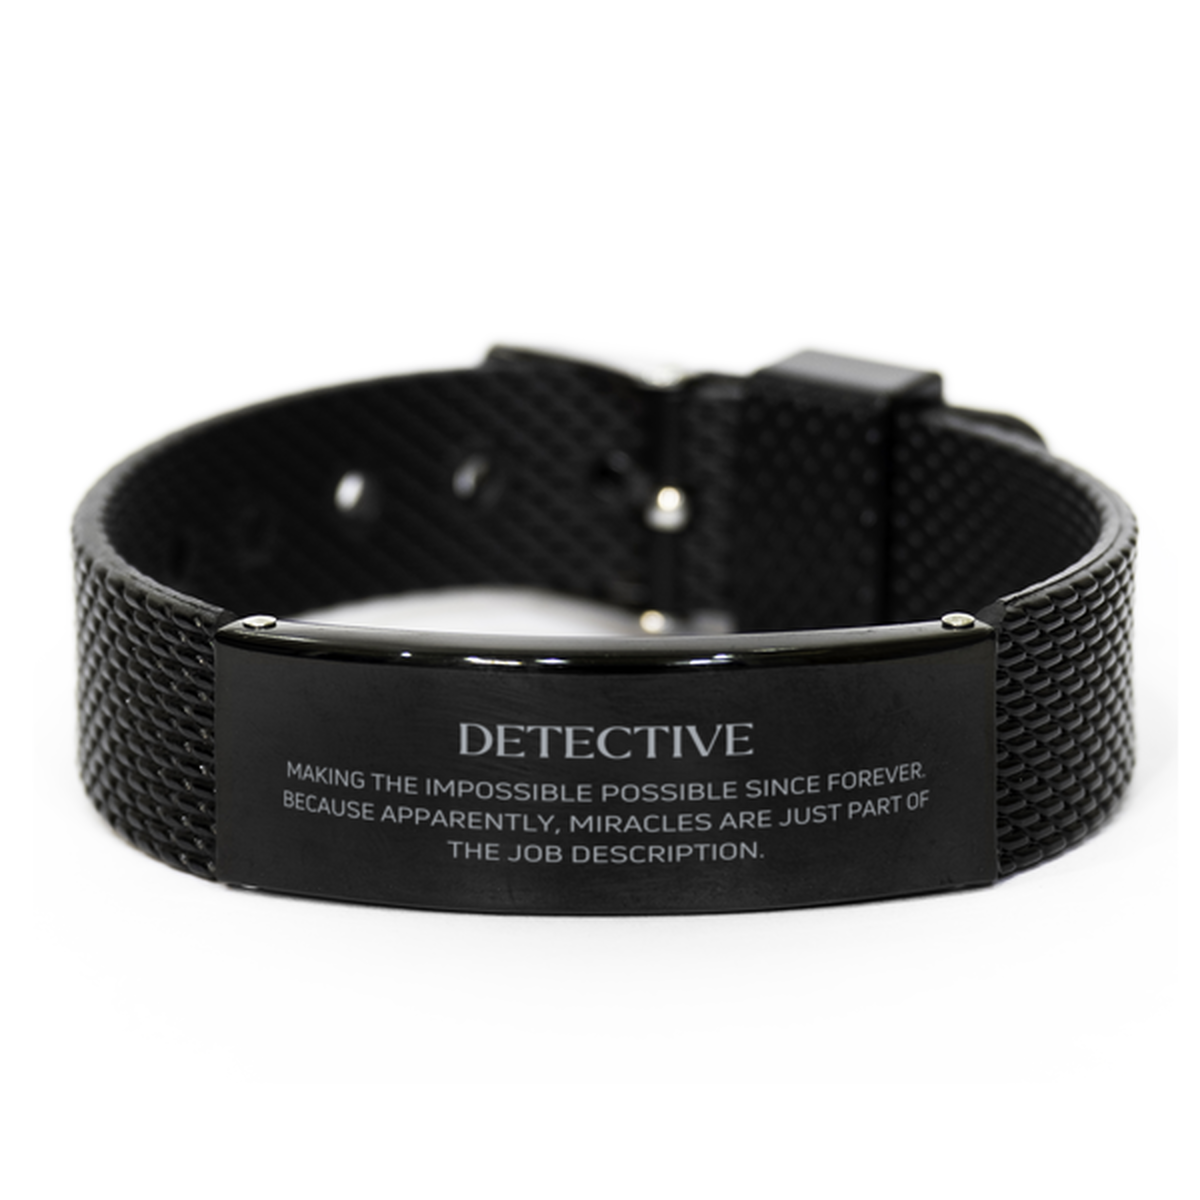 Funny Detective Gifts, Miracles are just part of the job description, Inspirational Birthday Black Shark Mesh Bracelet For Detective, Men, Women, Coworkers, Friends, Boss